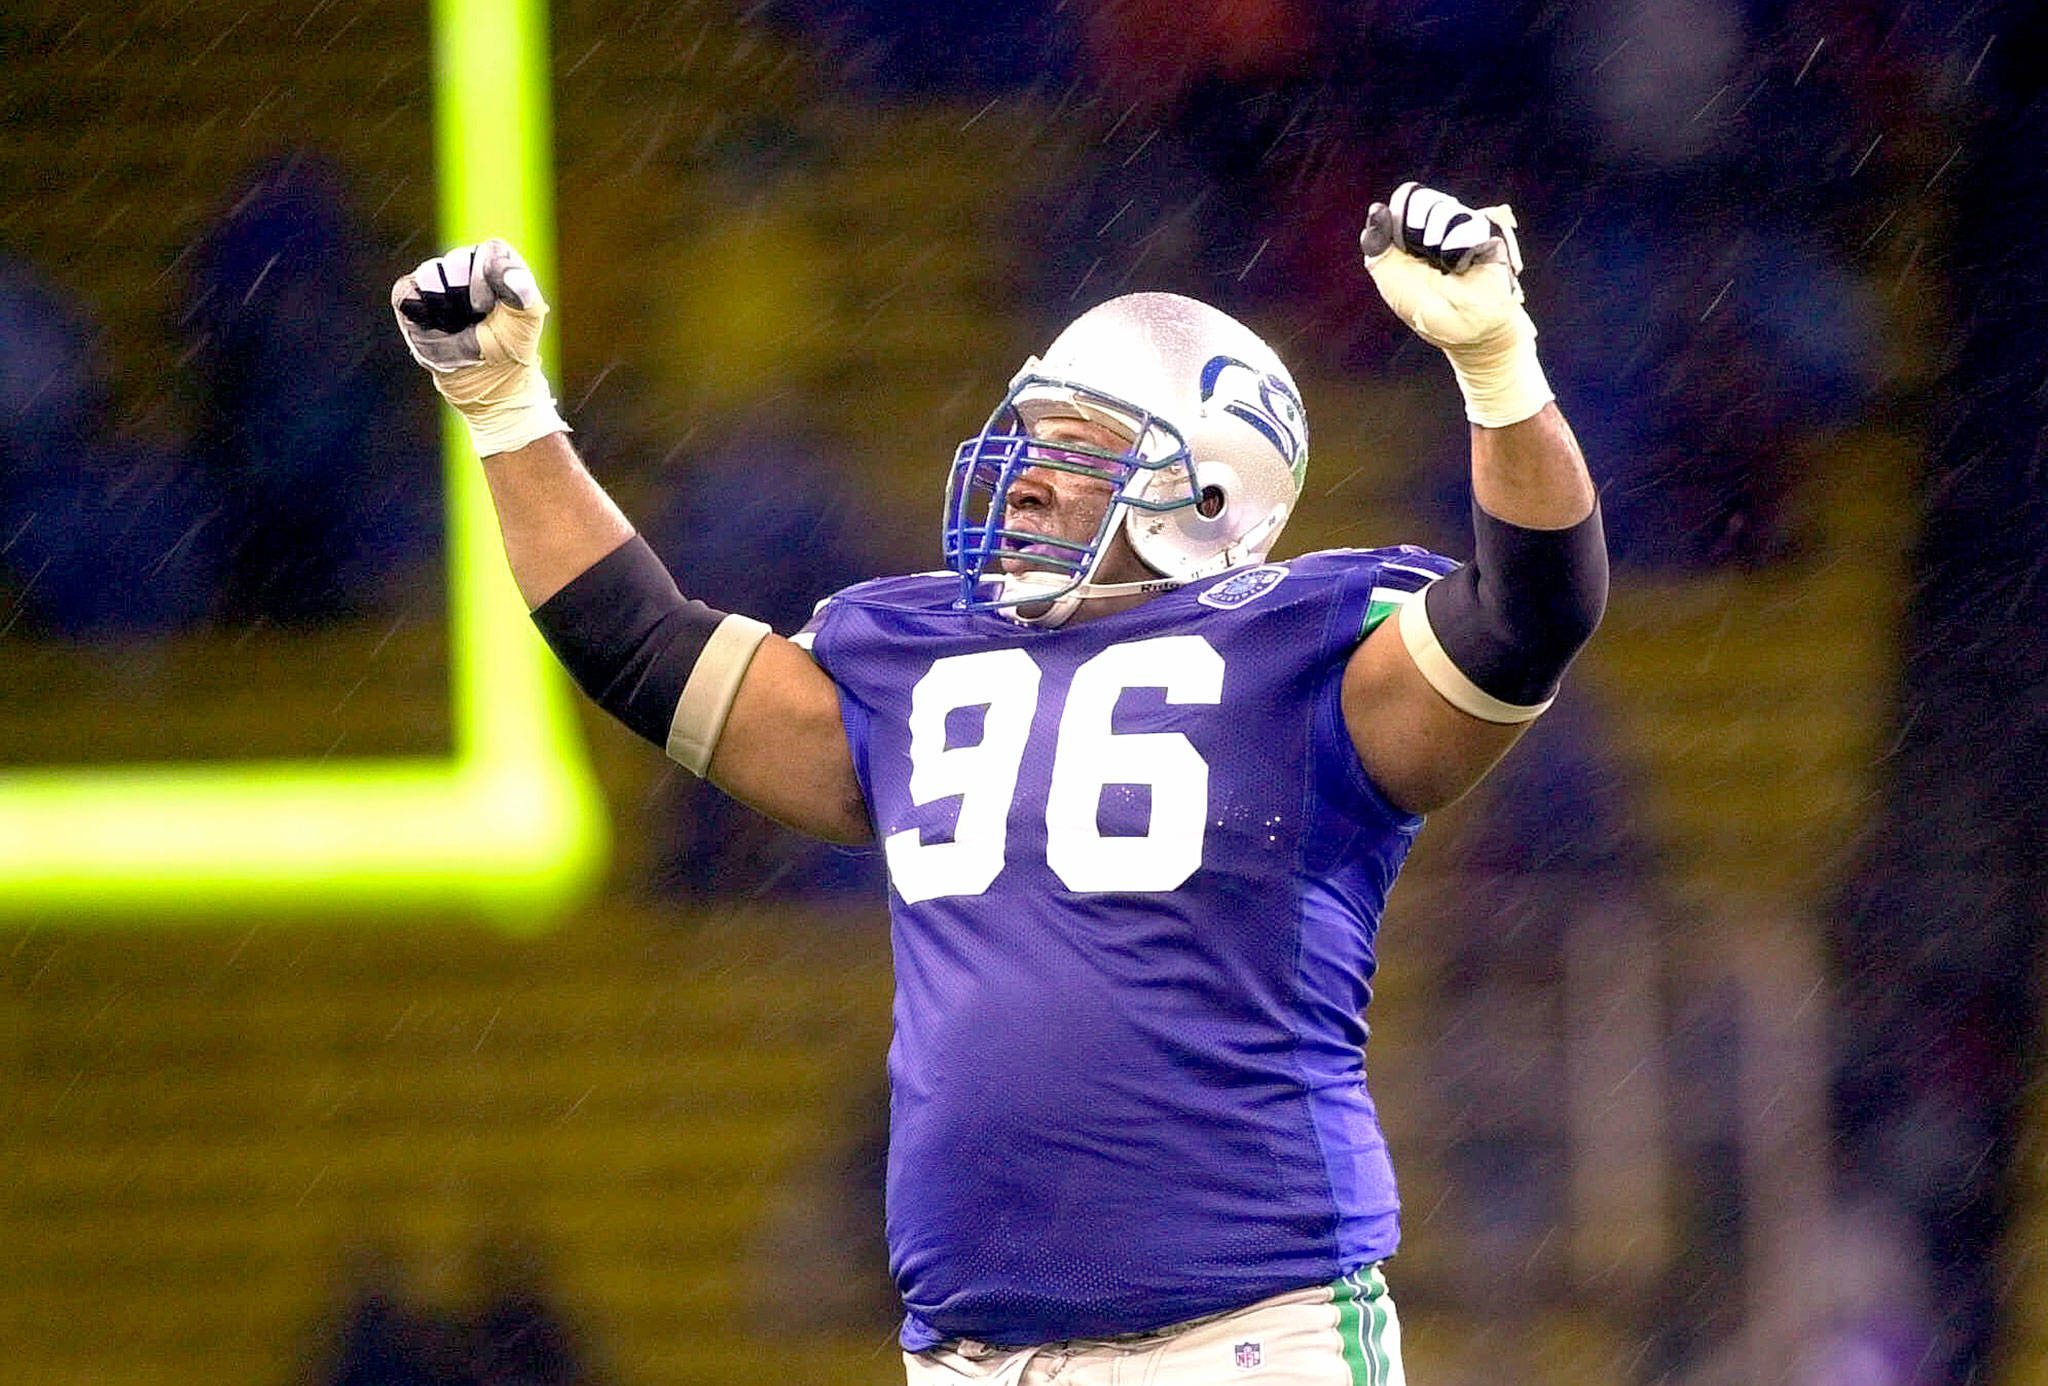 The Associated Press                                Seattle Seahawks defensive tackle Cortez Kennedy (96) celebrates Seattle’s 27-24 victory over the Oakland Raiders in an NFL football game in Seattle in December 2000. The Orlando Police Department confirmed that Kennedy was found dead Tuesday in Orlando.